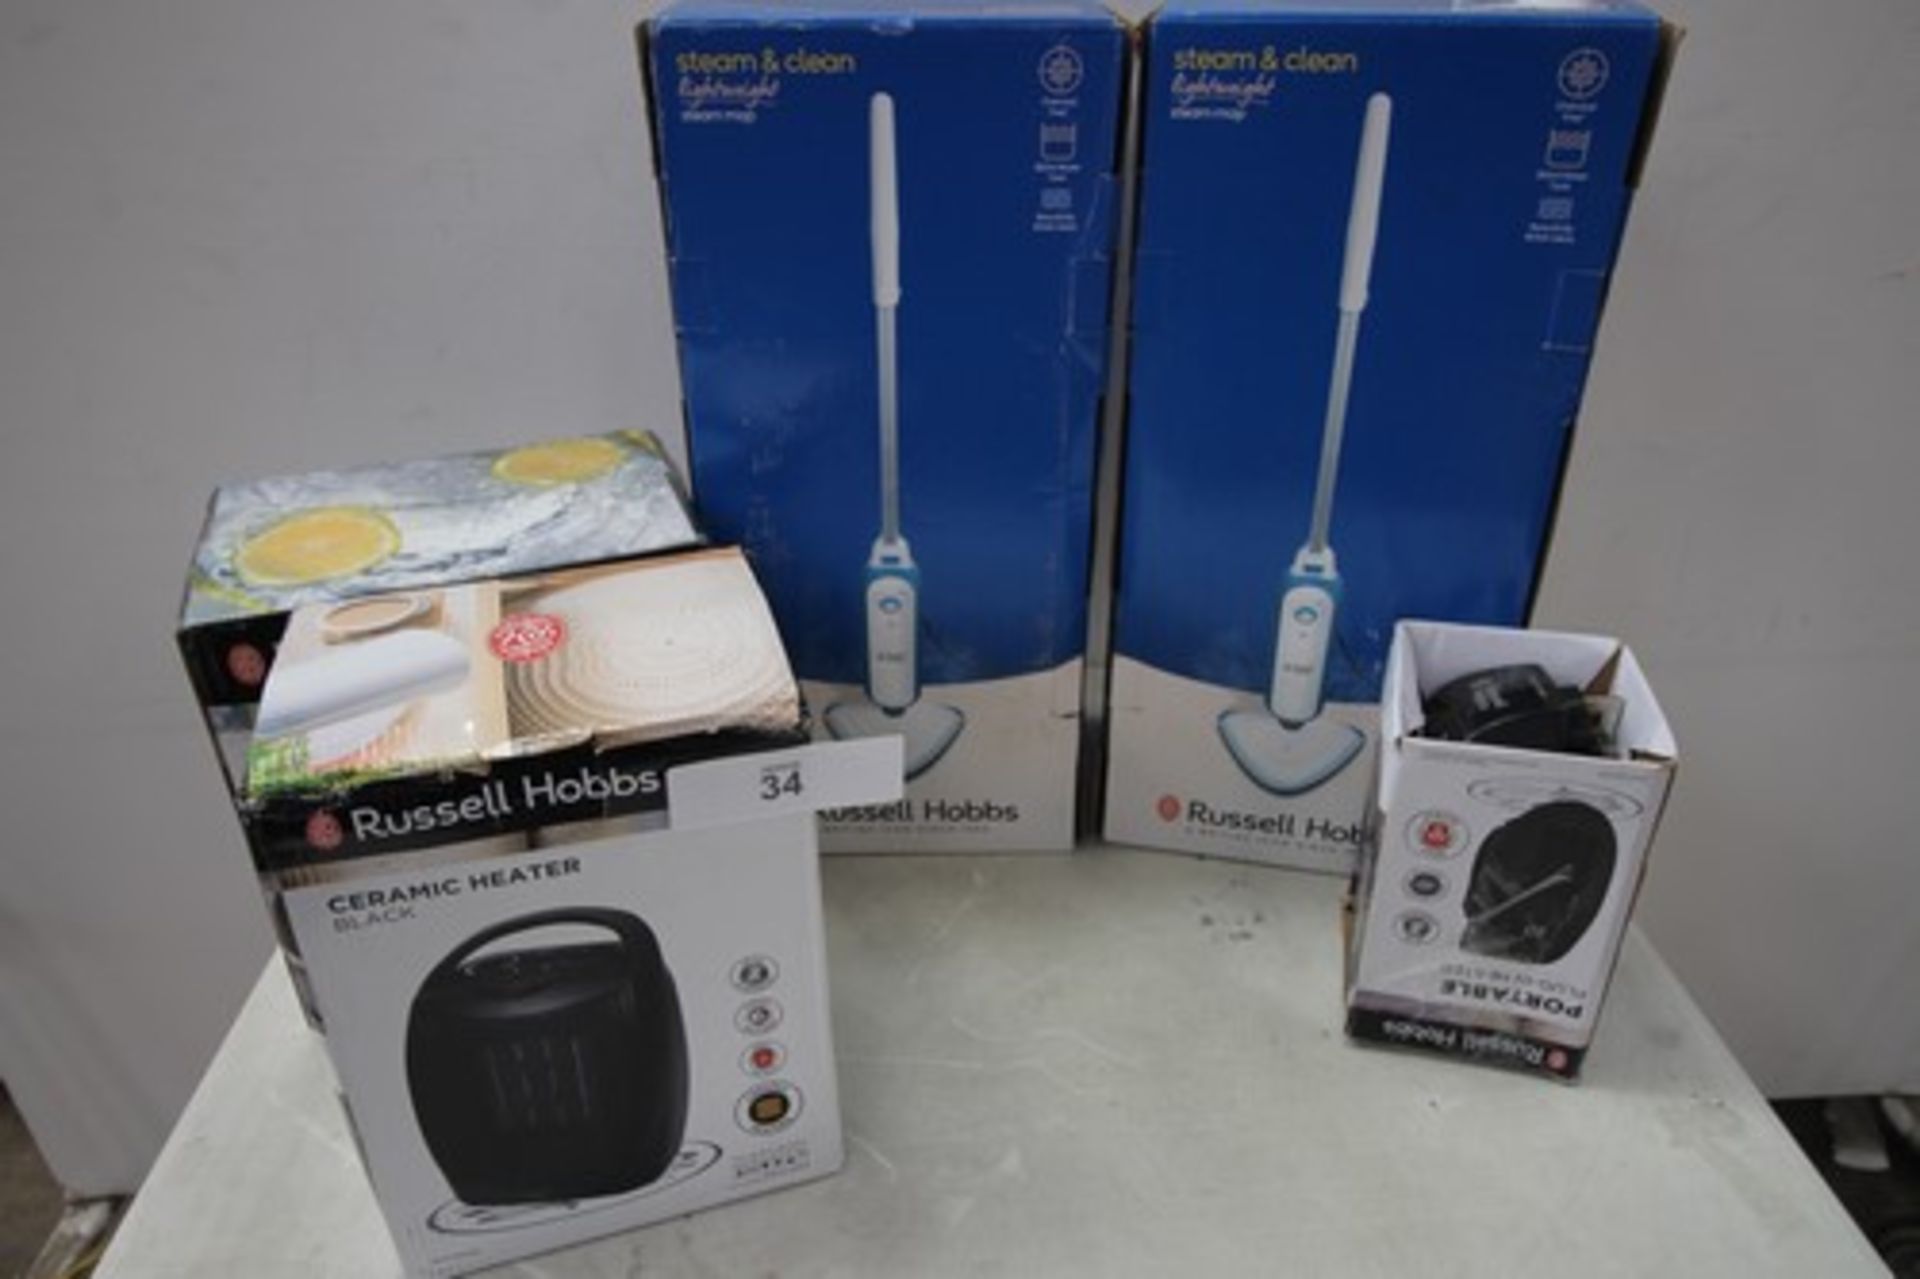 5 x Russell Hobbs products, including light weight steam cleaners, ceramic heaters and 4L mini